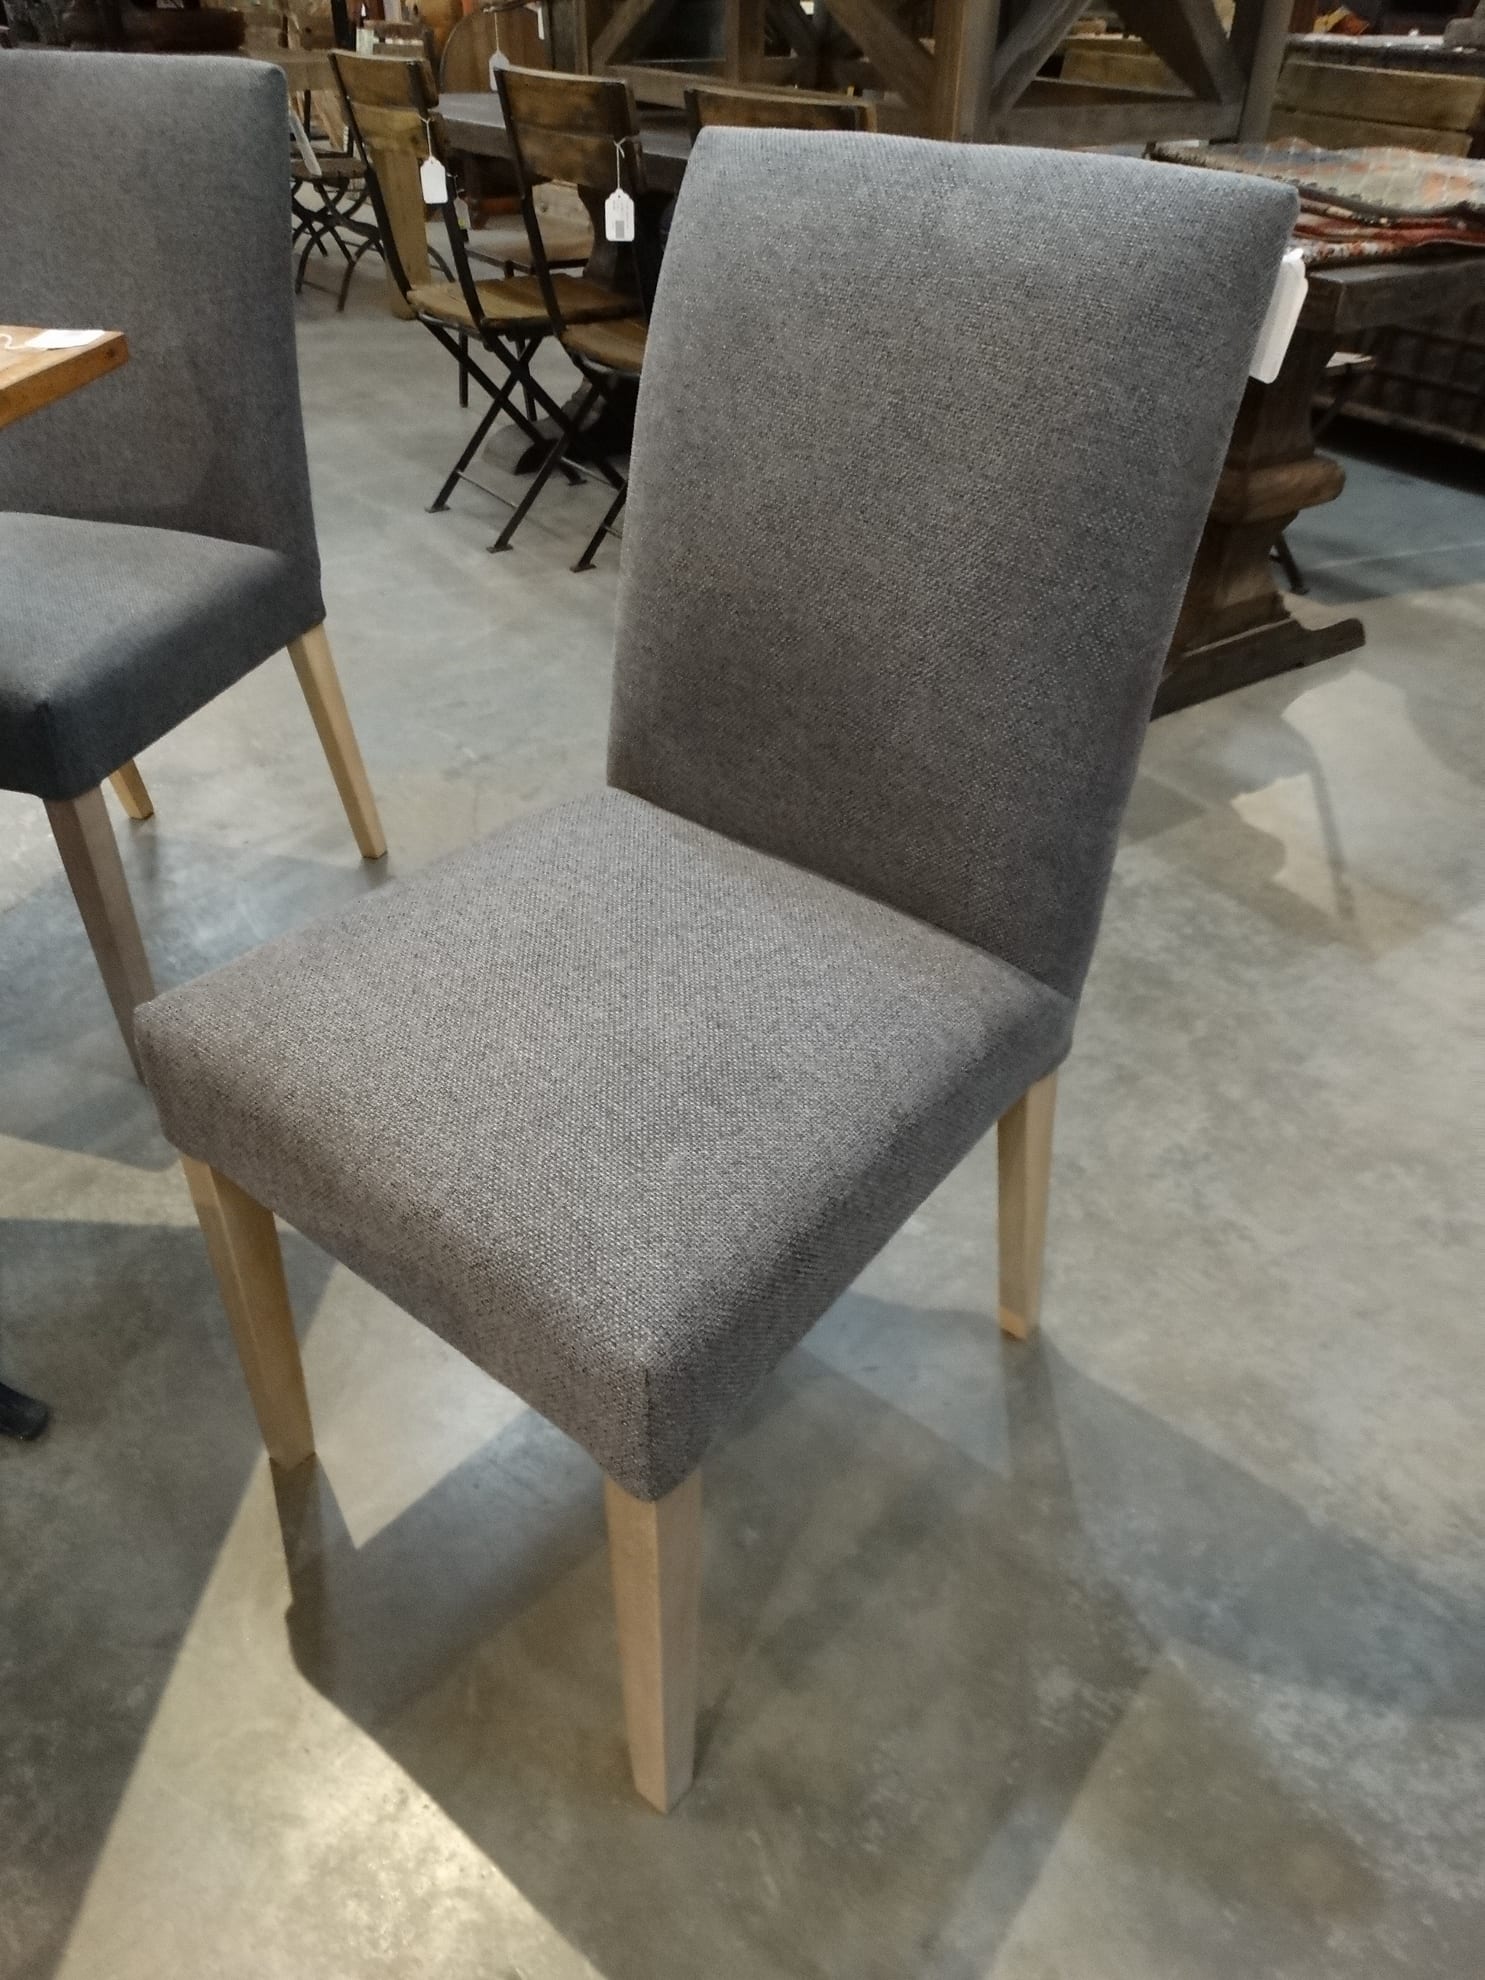 This grey linen side chair has a very modern flair with